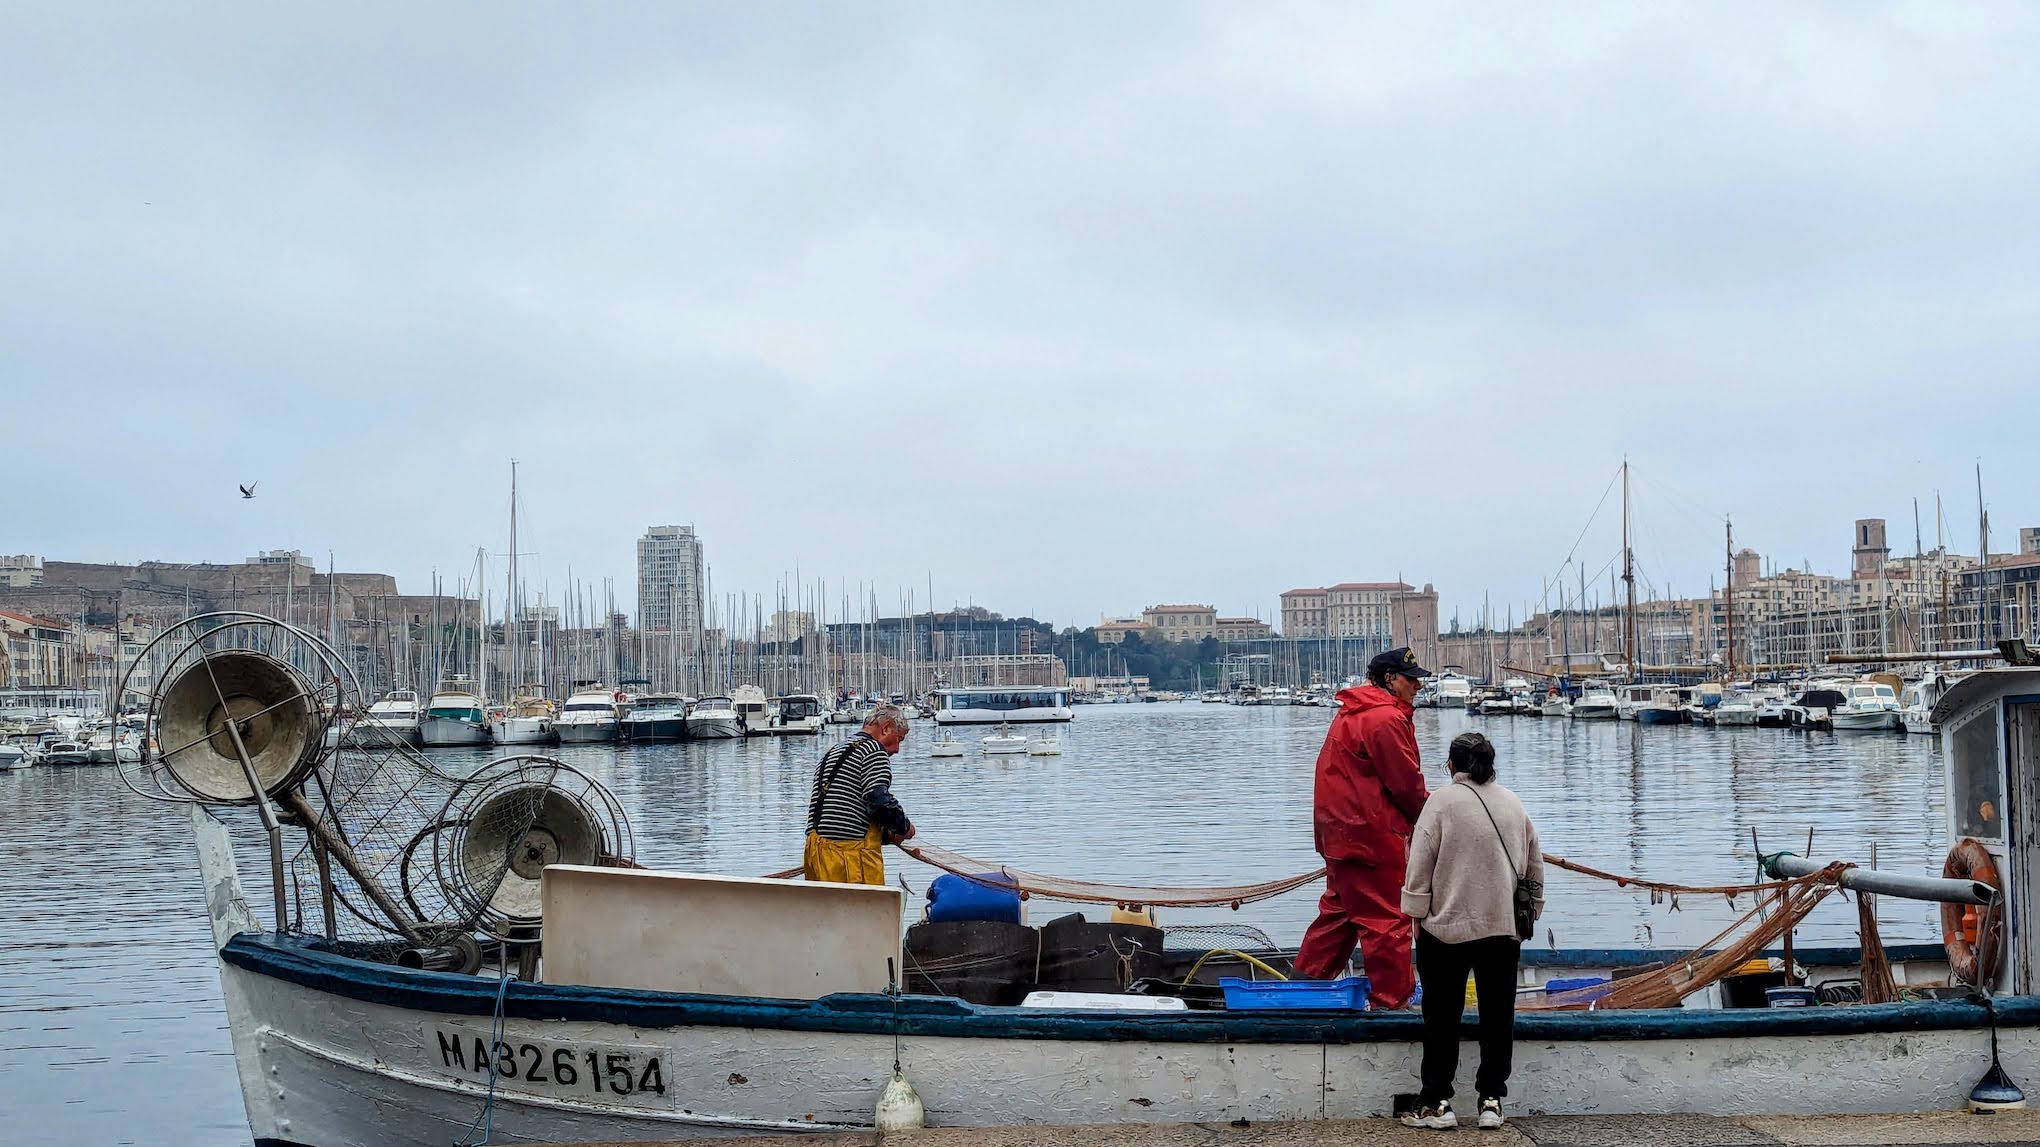 A Picture of Fishermen sorting nets on the port of marseille with the new electric ferry in the backgroun found on our self guided food tour of marseille